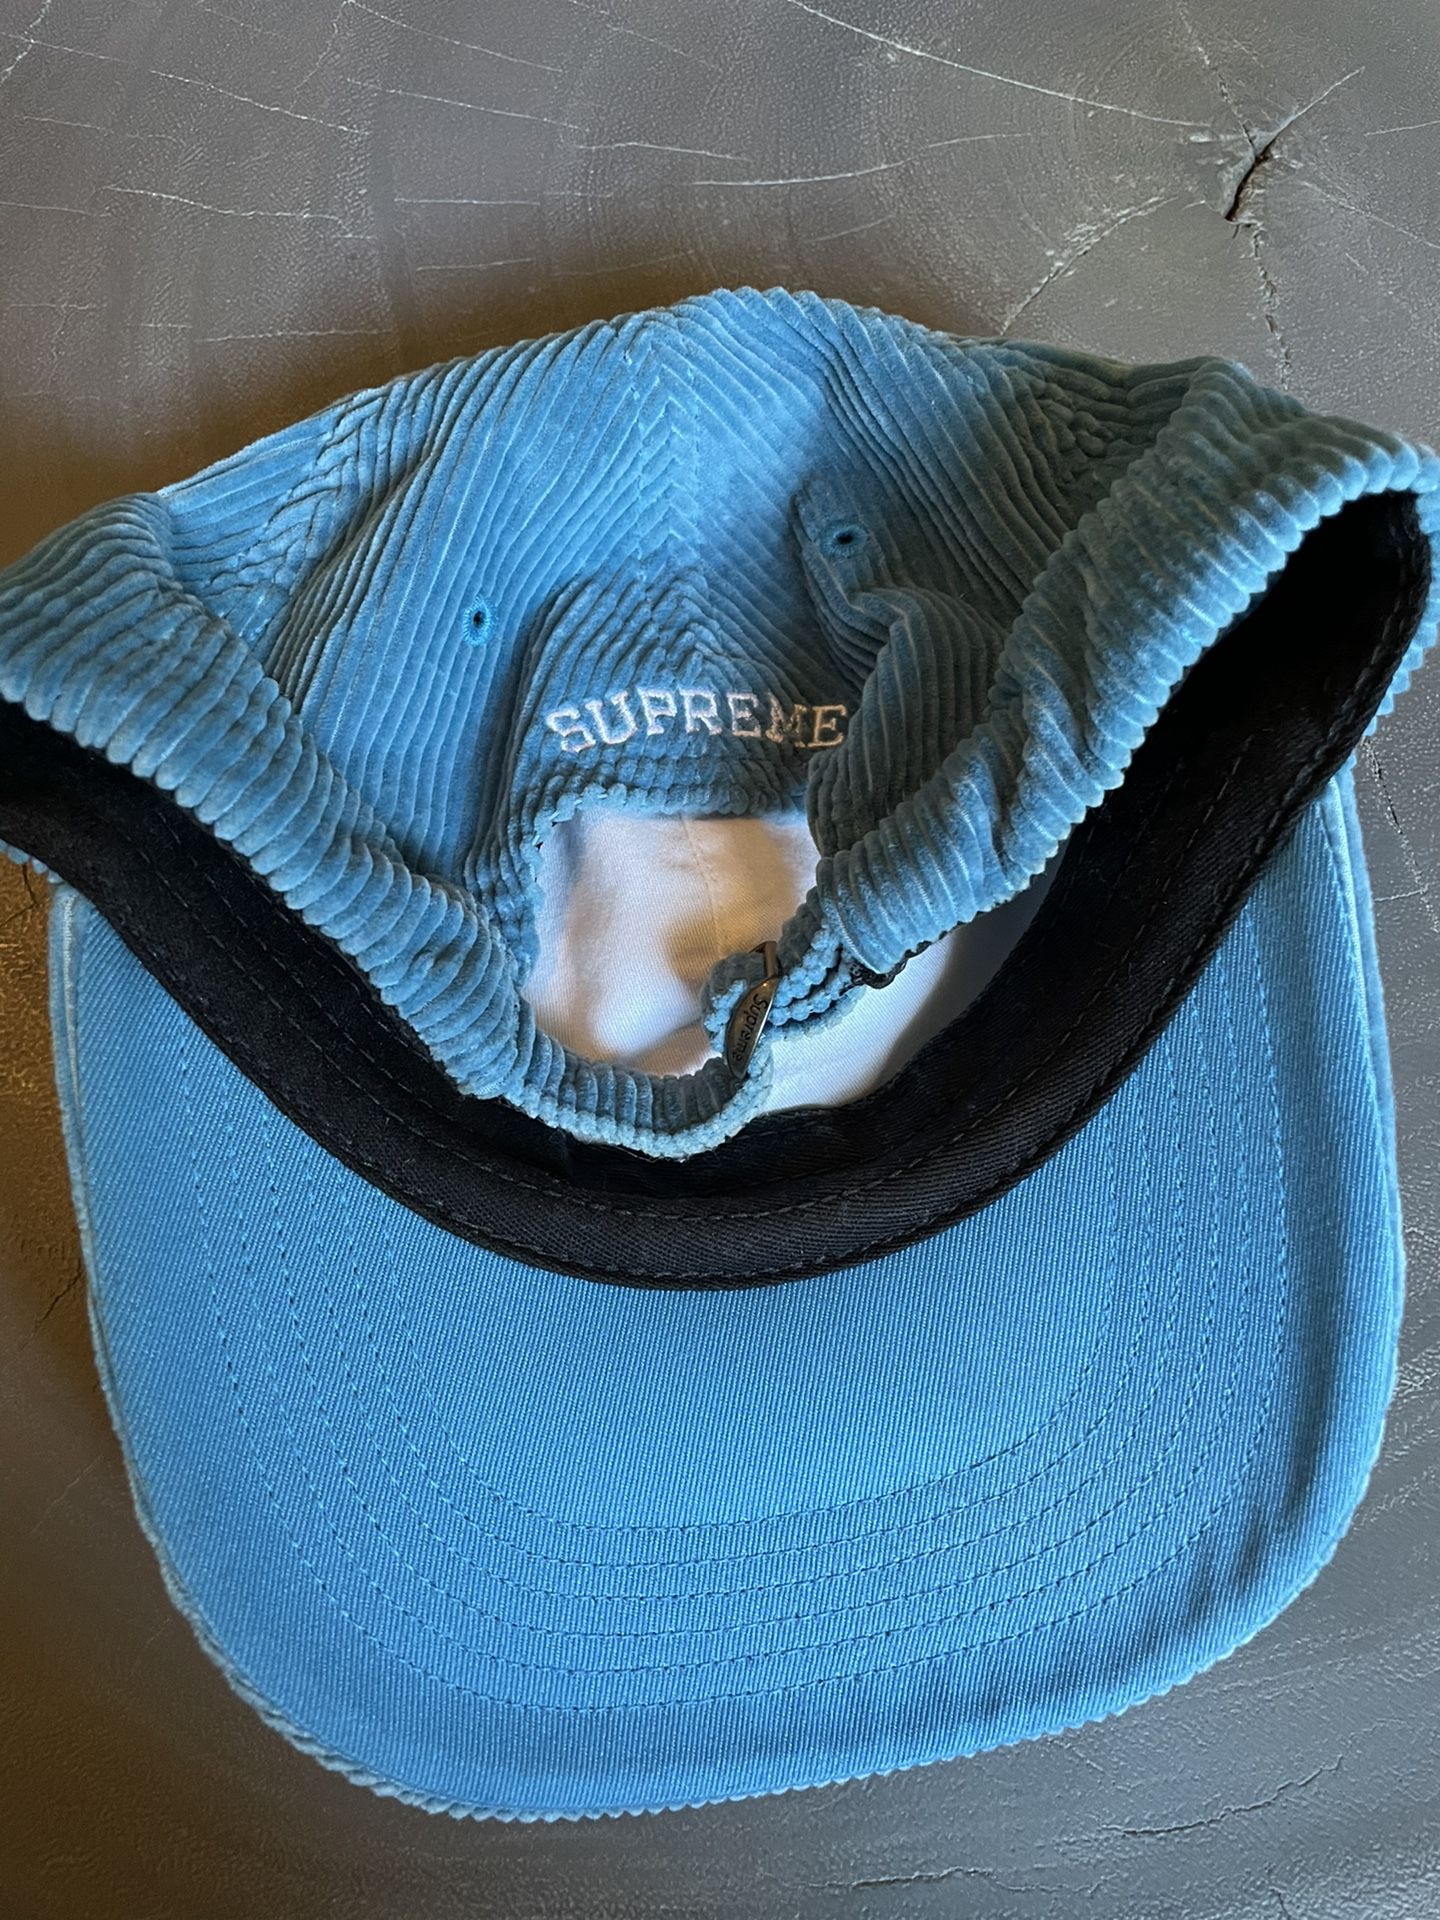 Supreme Black 5 Panel Hat for Sale in Seattle, WA - OfferUp